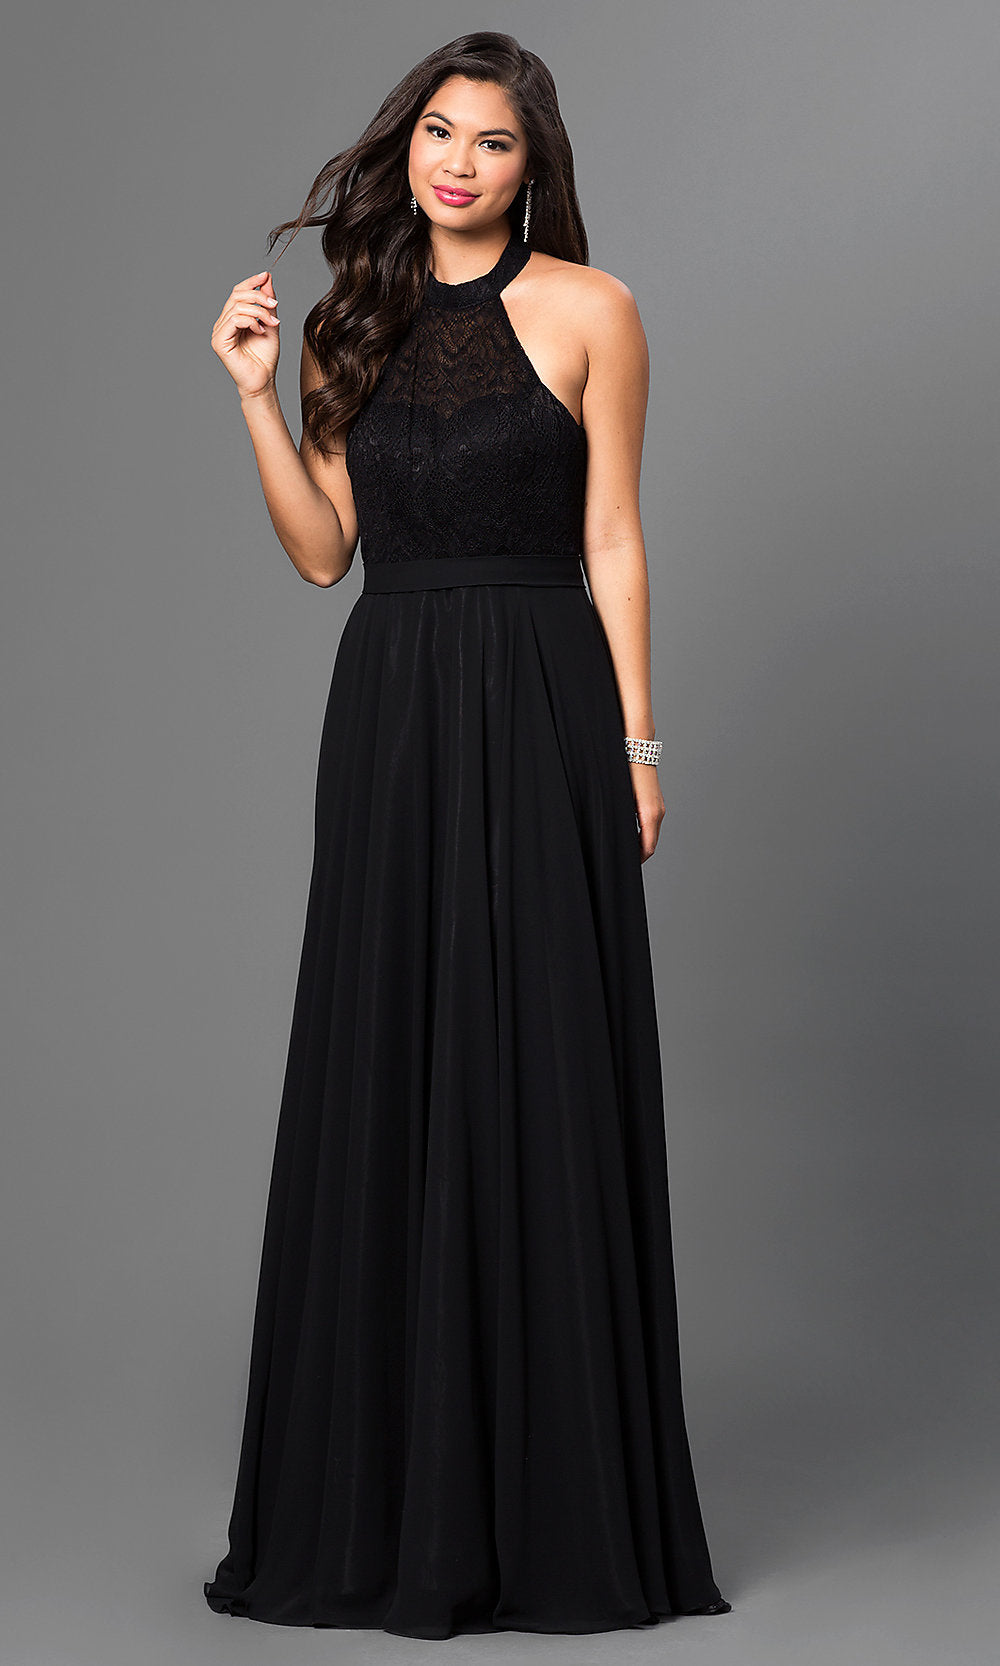 Black Long Formal Evening Gown With Lace Halter Top